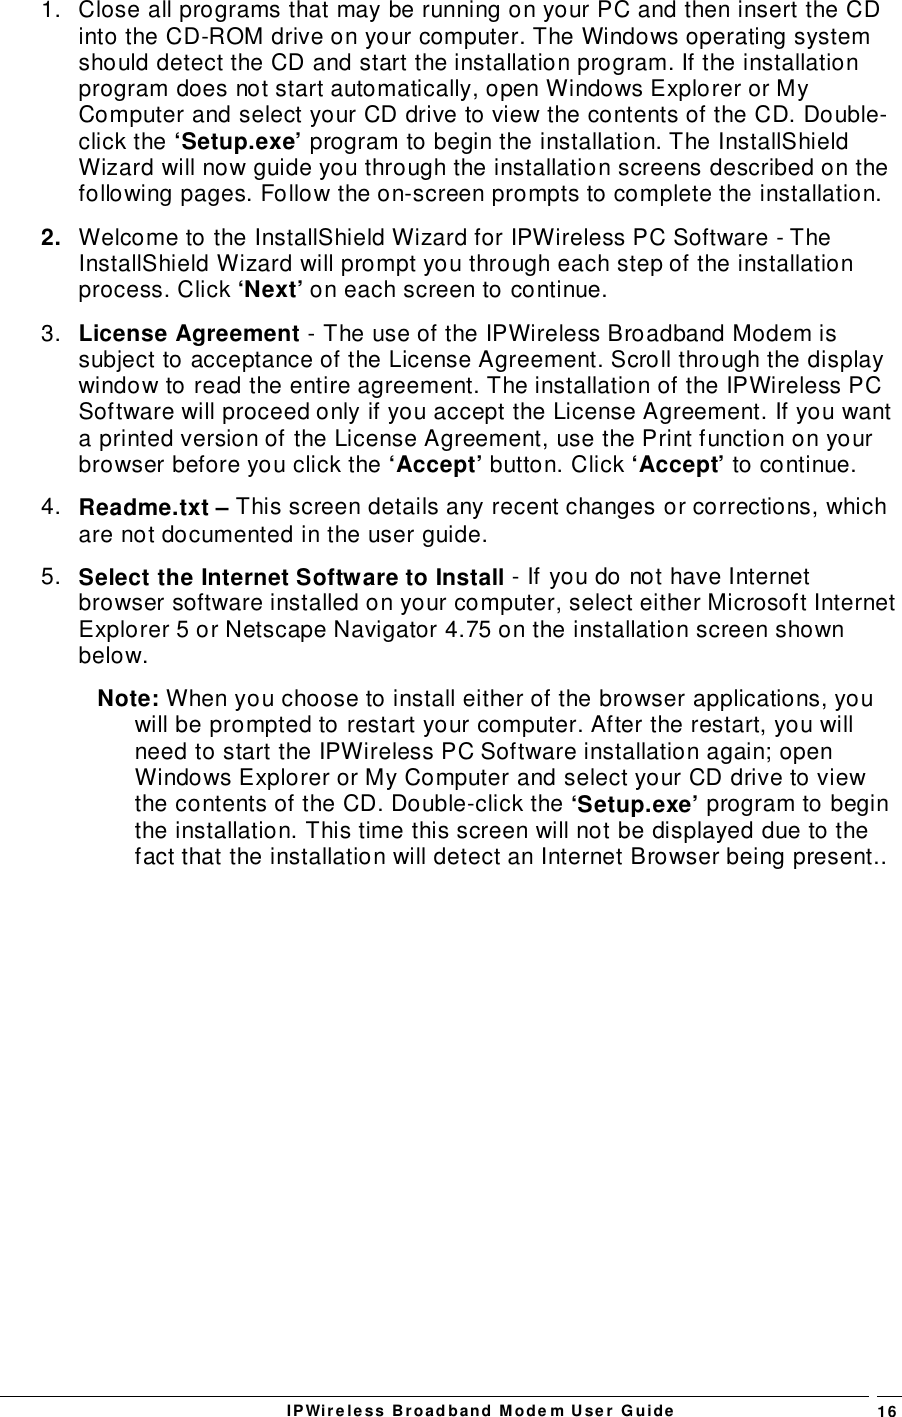 IPWireless Broadband Modem User Guide 161.  Close all programs that may be running on your PC and then insert the CDinto the CD-ROM drive on your computer. The Windows operating systemshould detect the CD and start the installation program. If the installationprogram does not start automatically, open Windows Explorer or MyComputer and select your CD drive to view the contents of the CD. Double-click the ‘Setup.exe’ program to begin the installation. The InstallShieldWizard will now guide you through the installation screens described on thefollowing pages. Follow the on-screen prompts to complete the installation.2.  Welcome to the InstallShield Wizard for IPWireless PC Software - TheInstallShield Wizard will prompt you through each step of the installationprocess. Click ‘Next’ on each screen to continue.3.  License Agreement - The use of the IPWireless Broadband Modem issubject to acceptance of the License Agreement. Scroll through the displaywindow to read the entire agreement. The installation of the IPWireless PCSoftware will proceed only if you accept the License Agreement. If you wanta printed version of the License Agreement, use the Print function on yourbrowser before you click the ‘Accept’ button. Click ‘Accept’ to continue.4.  Readme.txt – This screen details any recent changes or corrections, whichare not documented in the user guide.5.  Select the Internet Software to Install - If you do not have Internetbrowser software installed on your computer, select either Microsoft InternetExplorer 5 or Netscape Navigator 4.75 on the installation screen shownbelow.Note: When you choose to install either of the browser applications, youwill be prompted to restart your computer. After the restart, you willneed to start the IPWireless PC Software installation again; openWindows Explorer or My Computer and select your CD drive to viewthe contents of the CD. Double-click the ‘Setup.exe’ program to beginthe installation. This time this screen will not be displayed due to thefact that the installation will detect an Internet Browser being present..